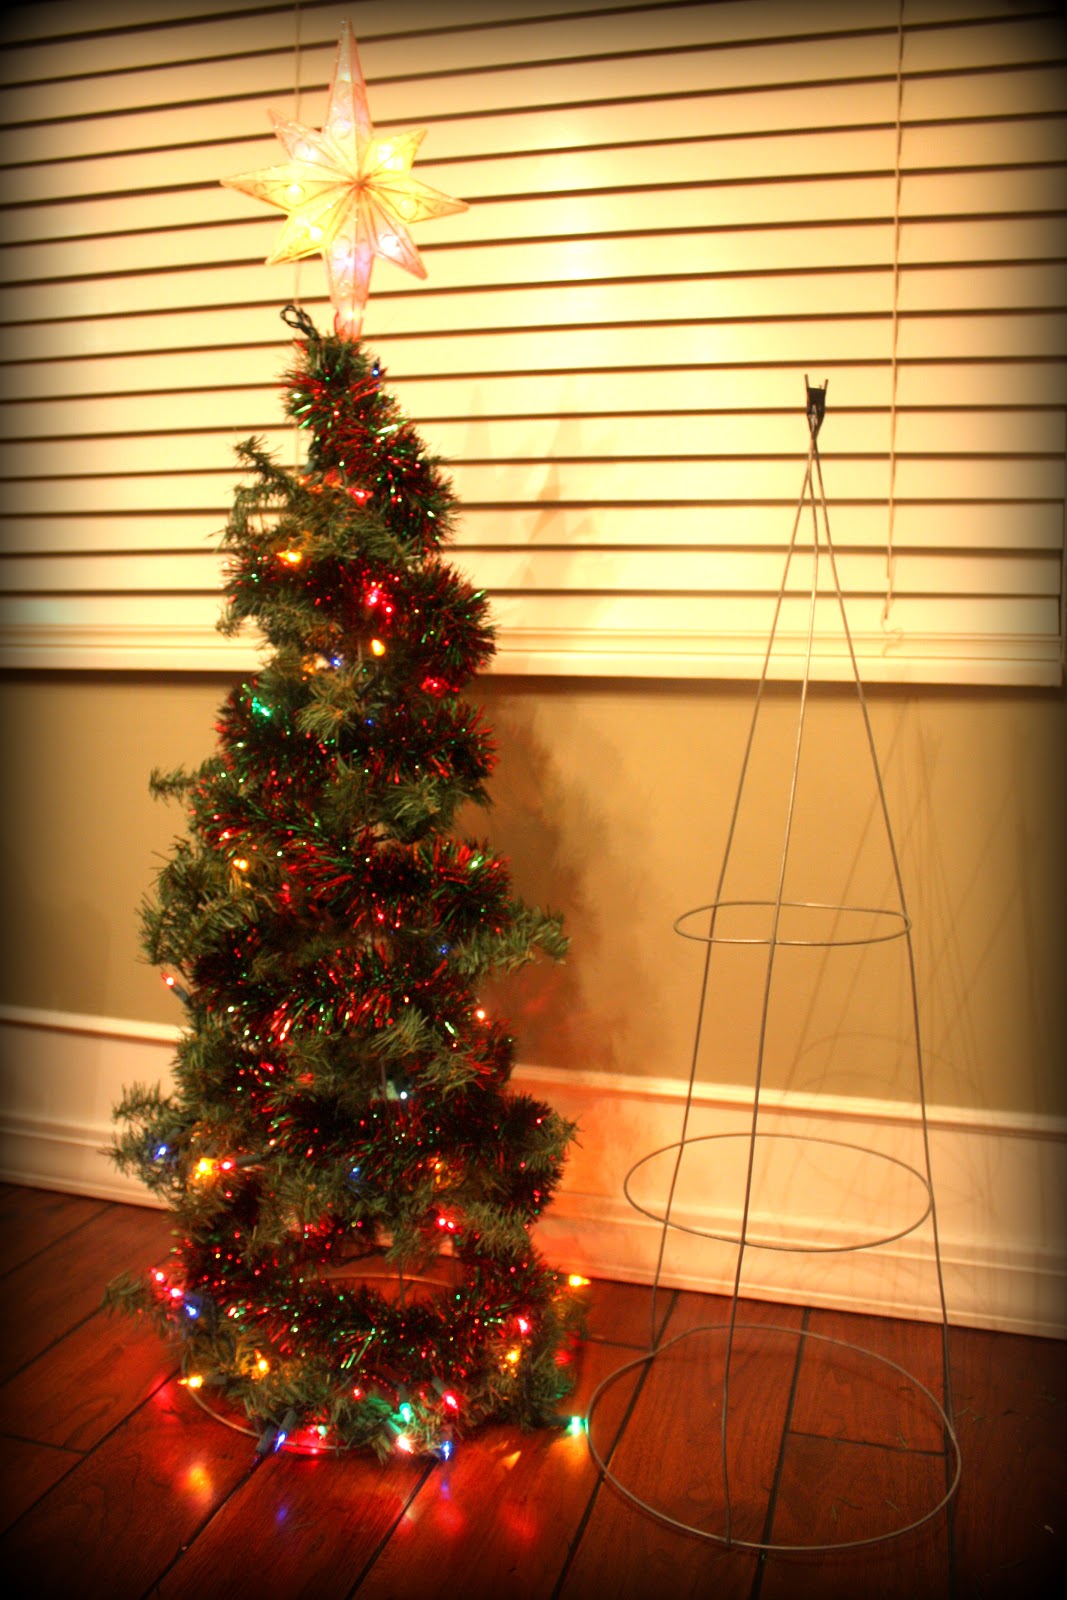 Embellish the Details: Christmas Tree Topiaries made out of Tomato Cages!